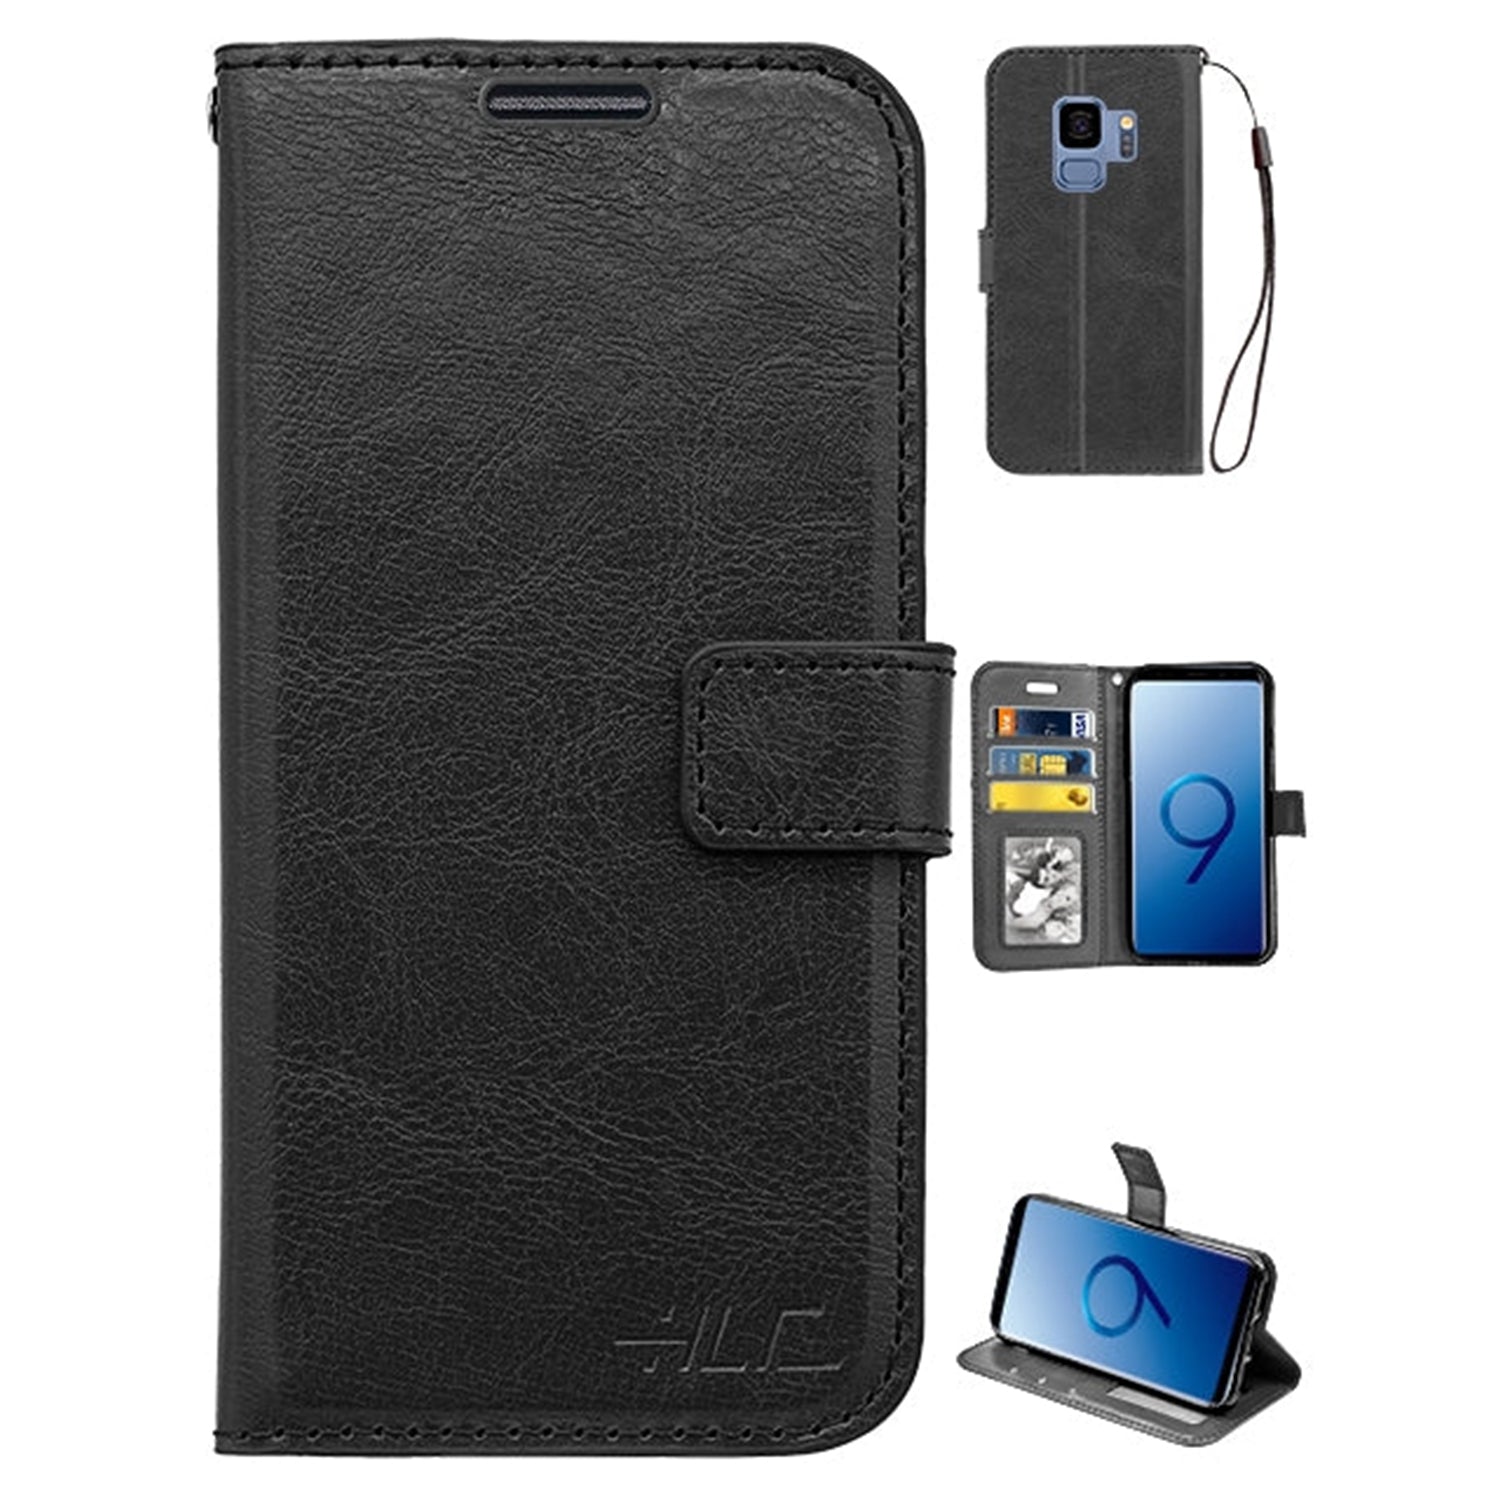 S9 Real Plain Leather Wallet Case